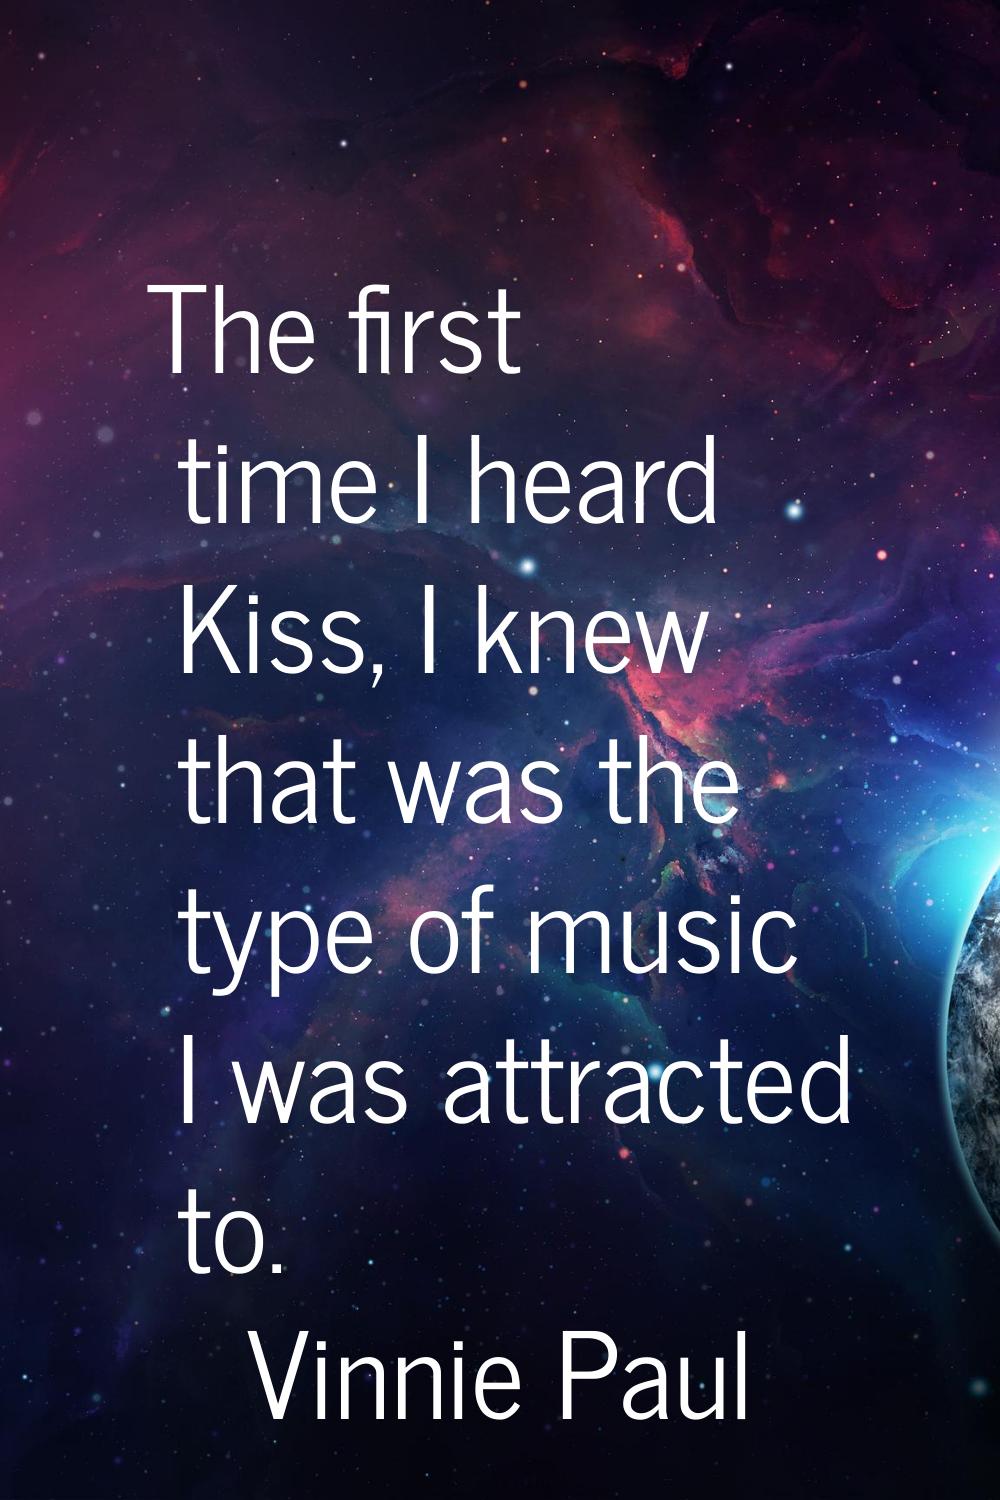 The first time I heard Kiss, I knew that was the type of music I was attracted to.